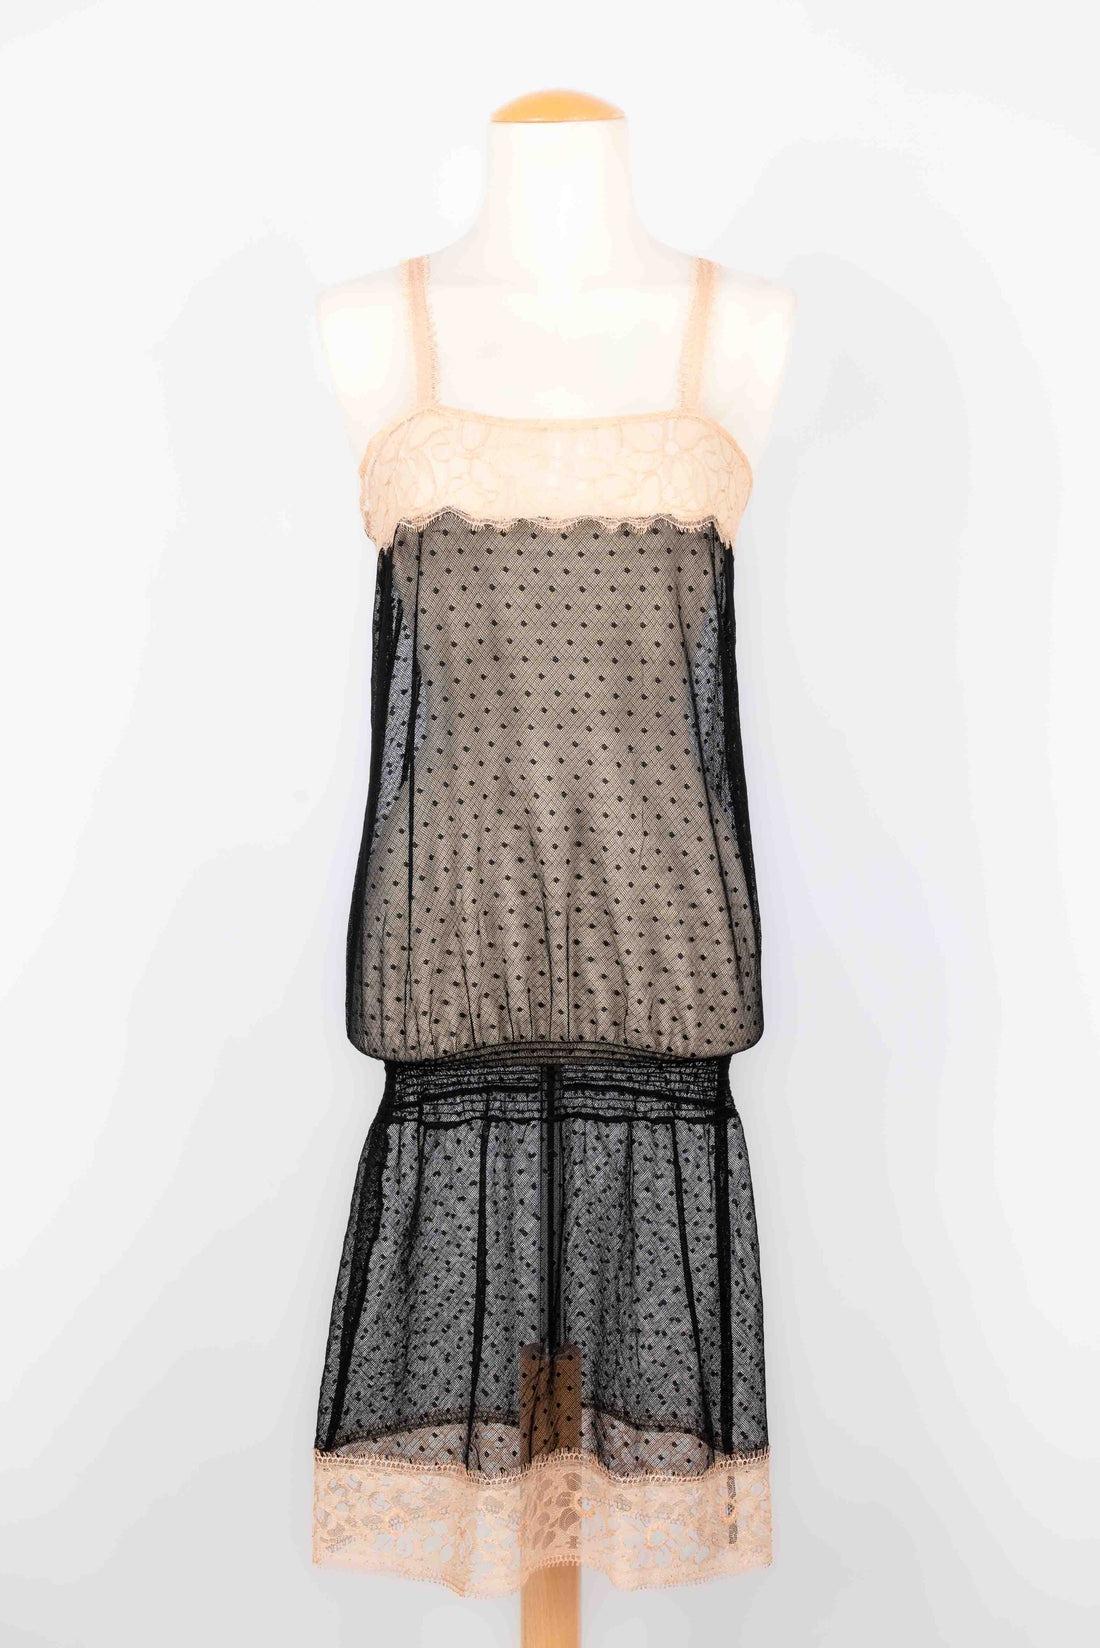 Chanel - Babydoll-style dress in black silk muslin and beige lace. Underclothing dress in dotted tulle and beige lace. No size indicated, it fits a 34FR/36FR.

Additional information:
Condition: Very good condition
Dimensions: Chest: 40 cm - Length: